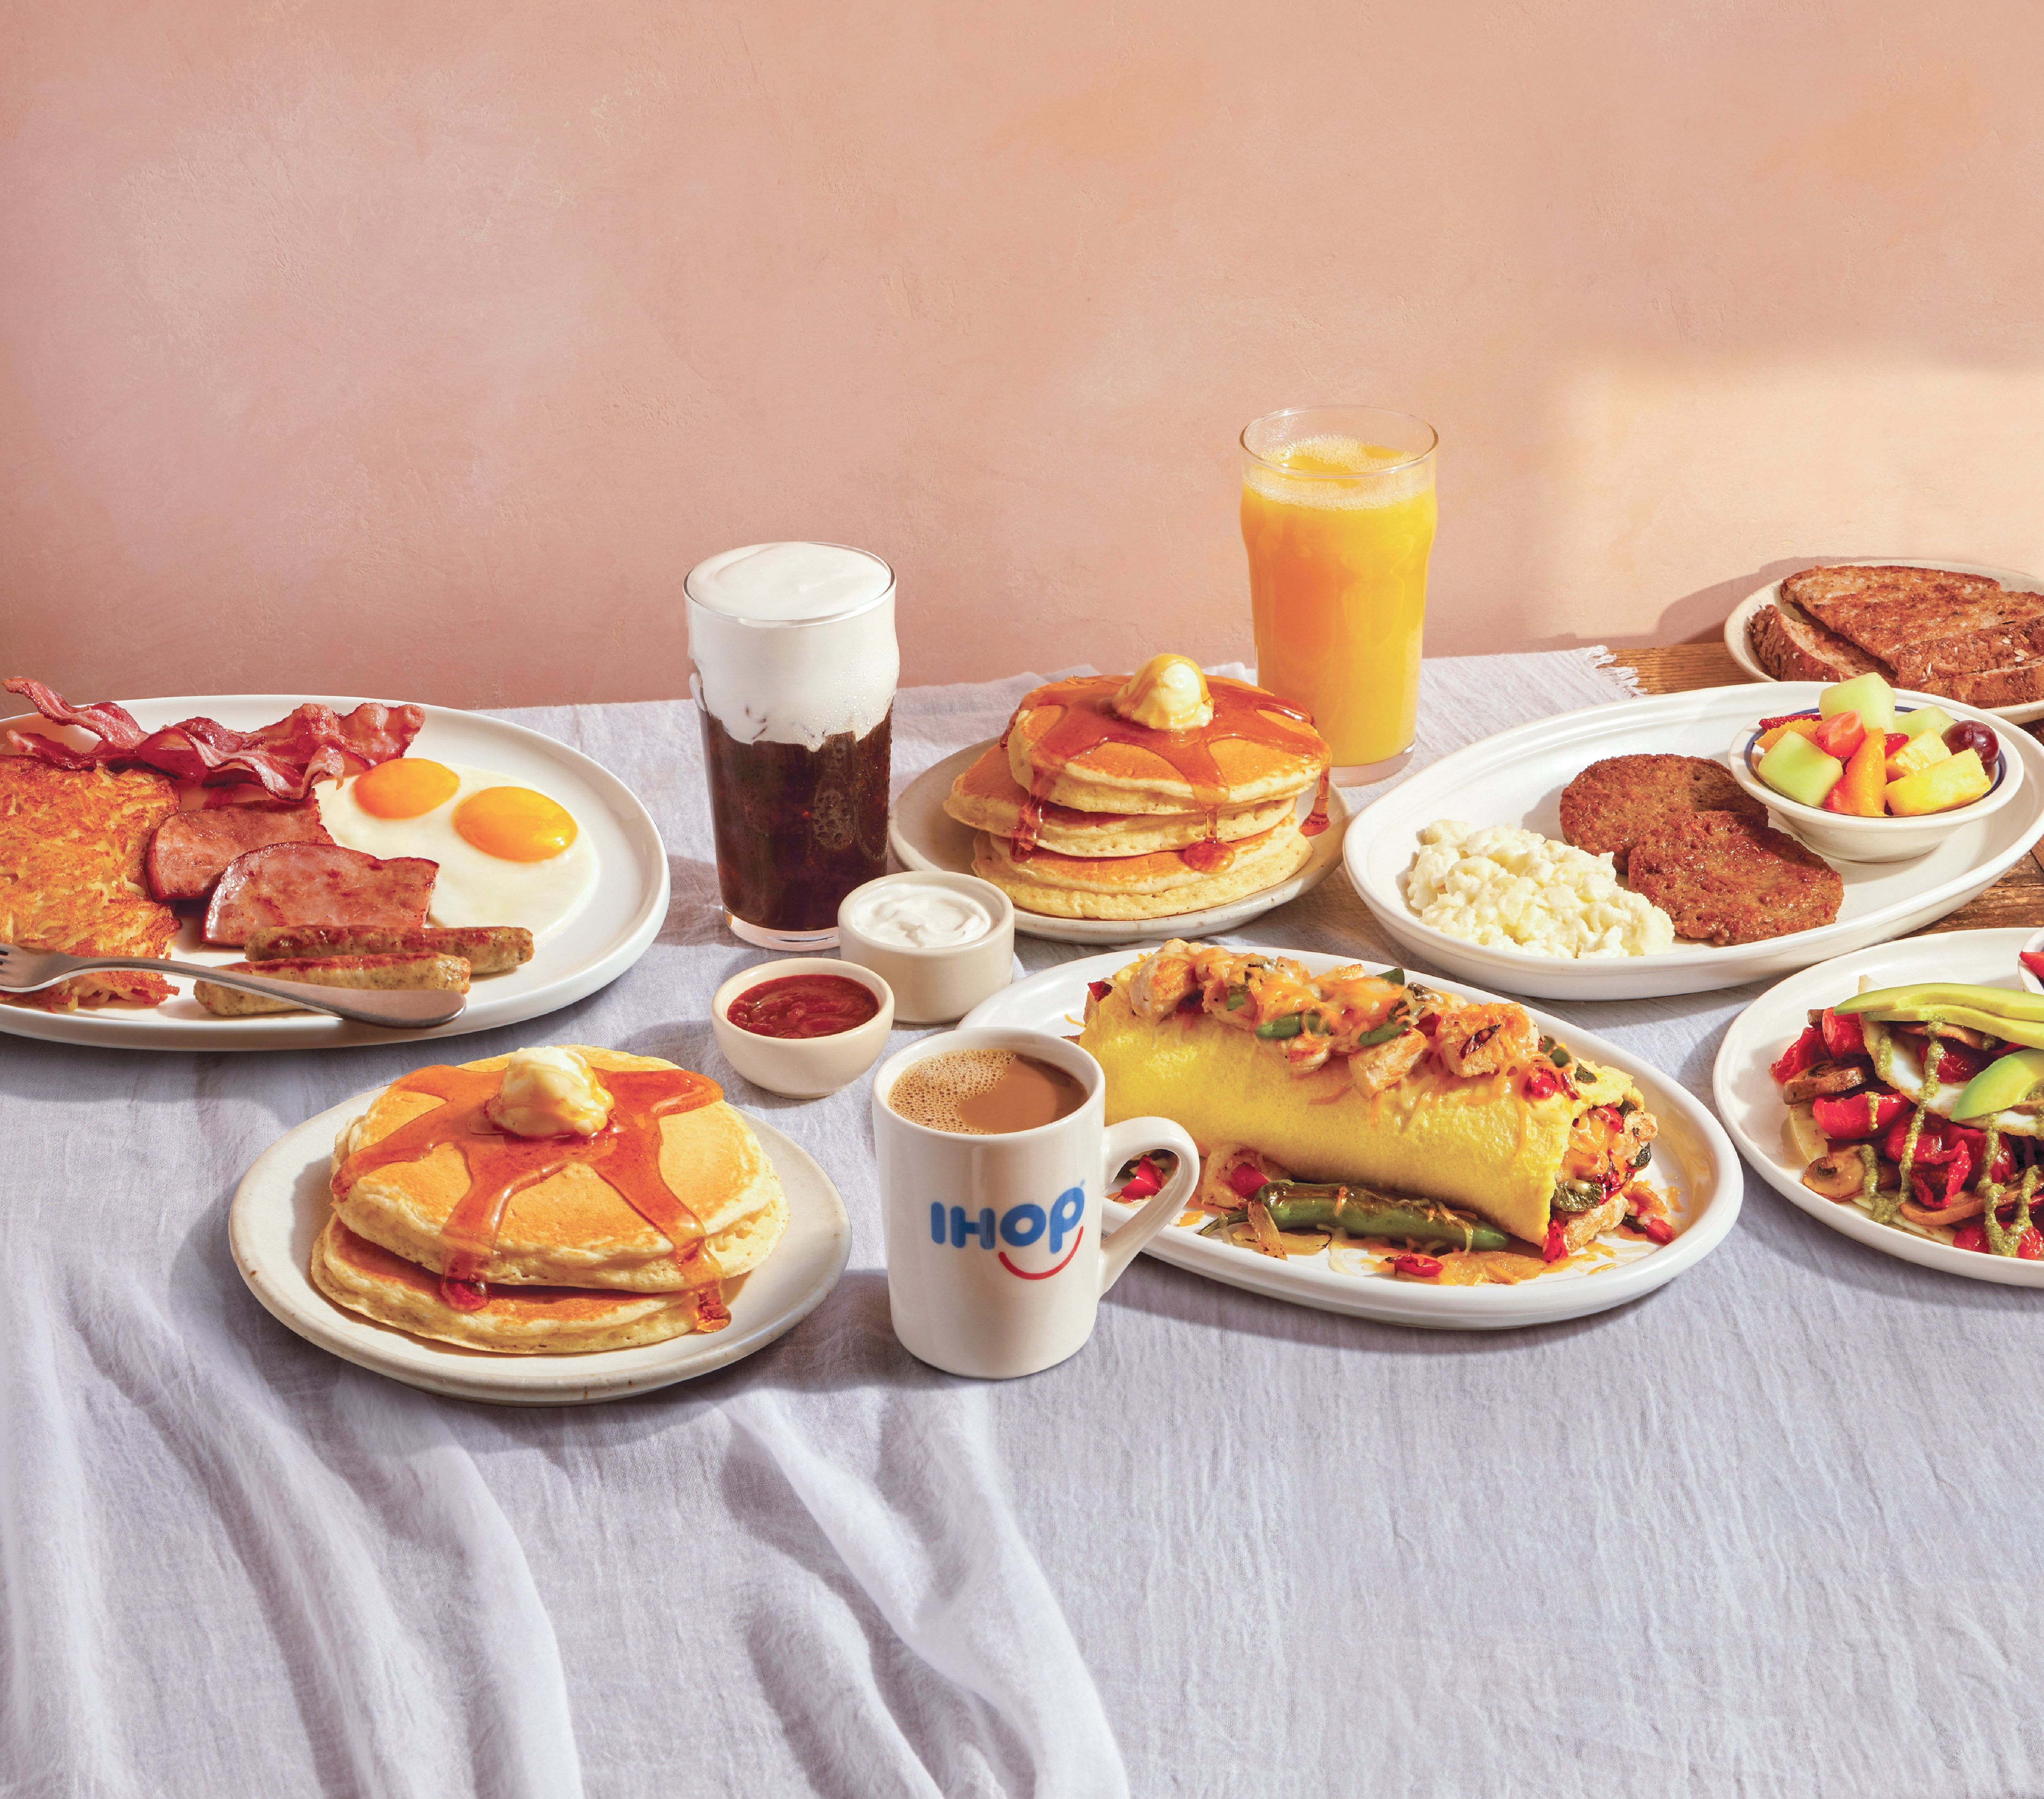 ihop impossible sausage and burger patties are part of their breakfast